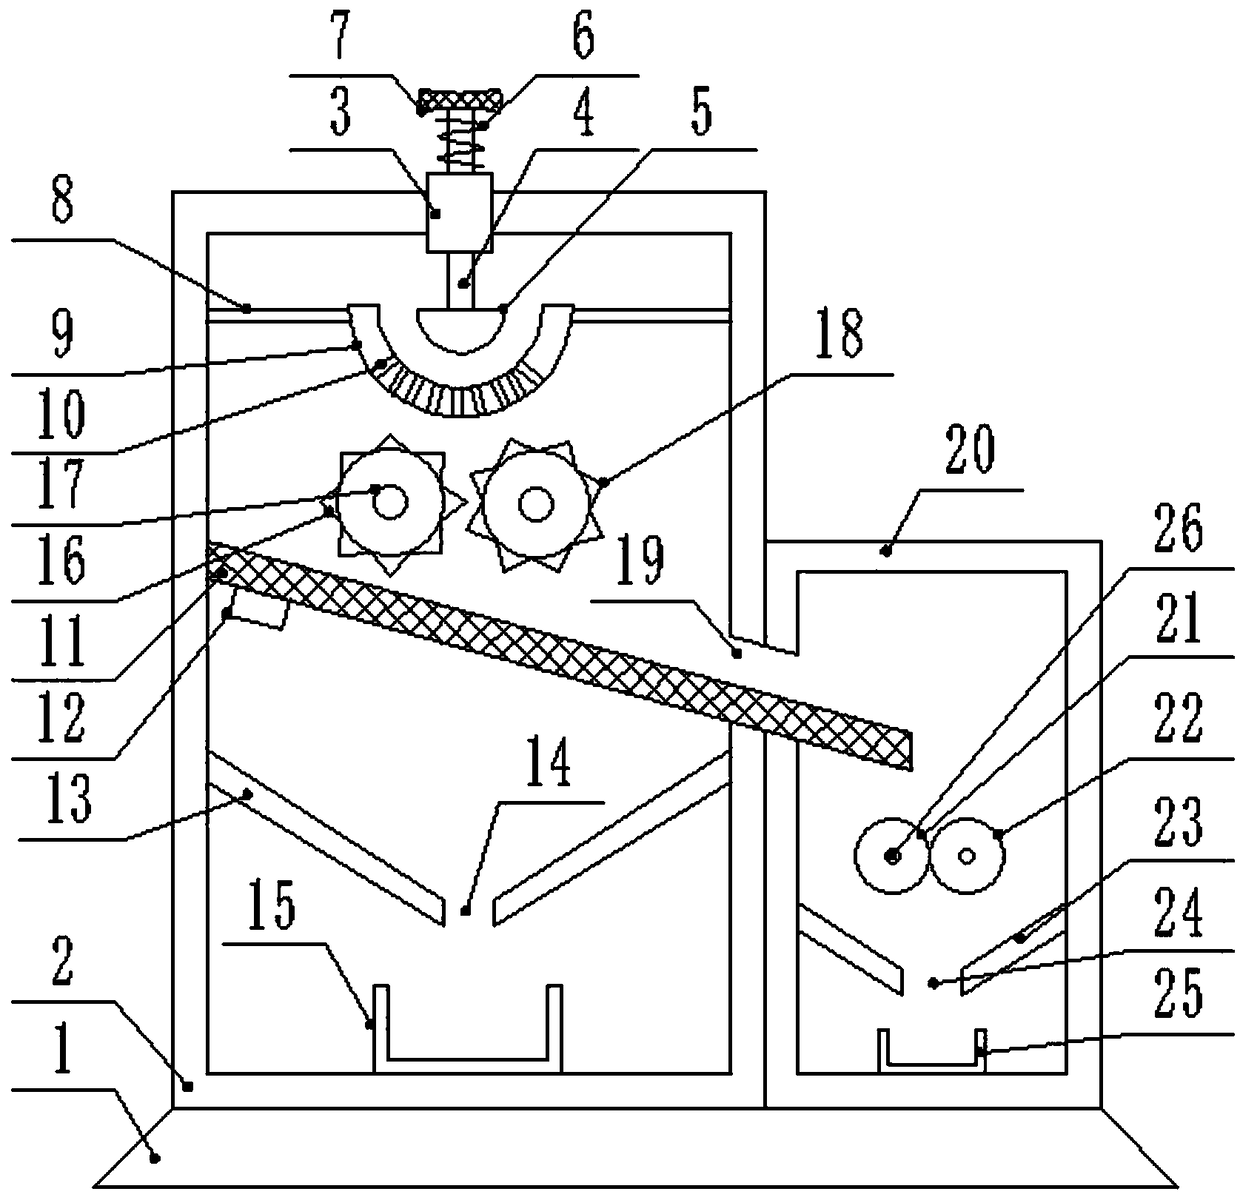 Manual-control crushing and grinding device for salt production